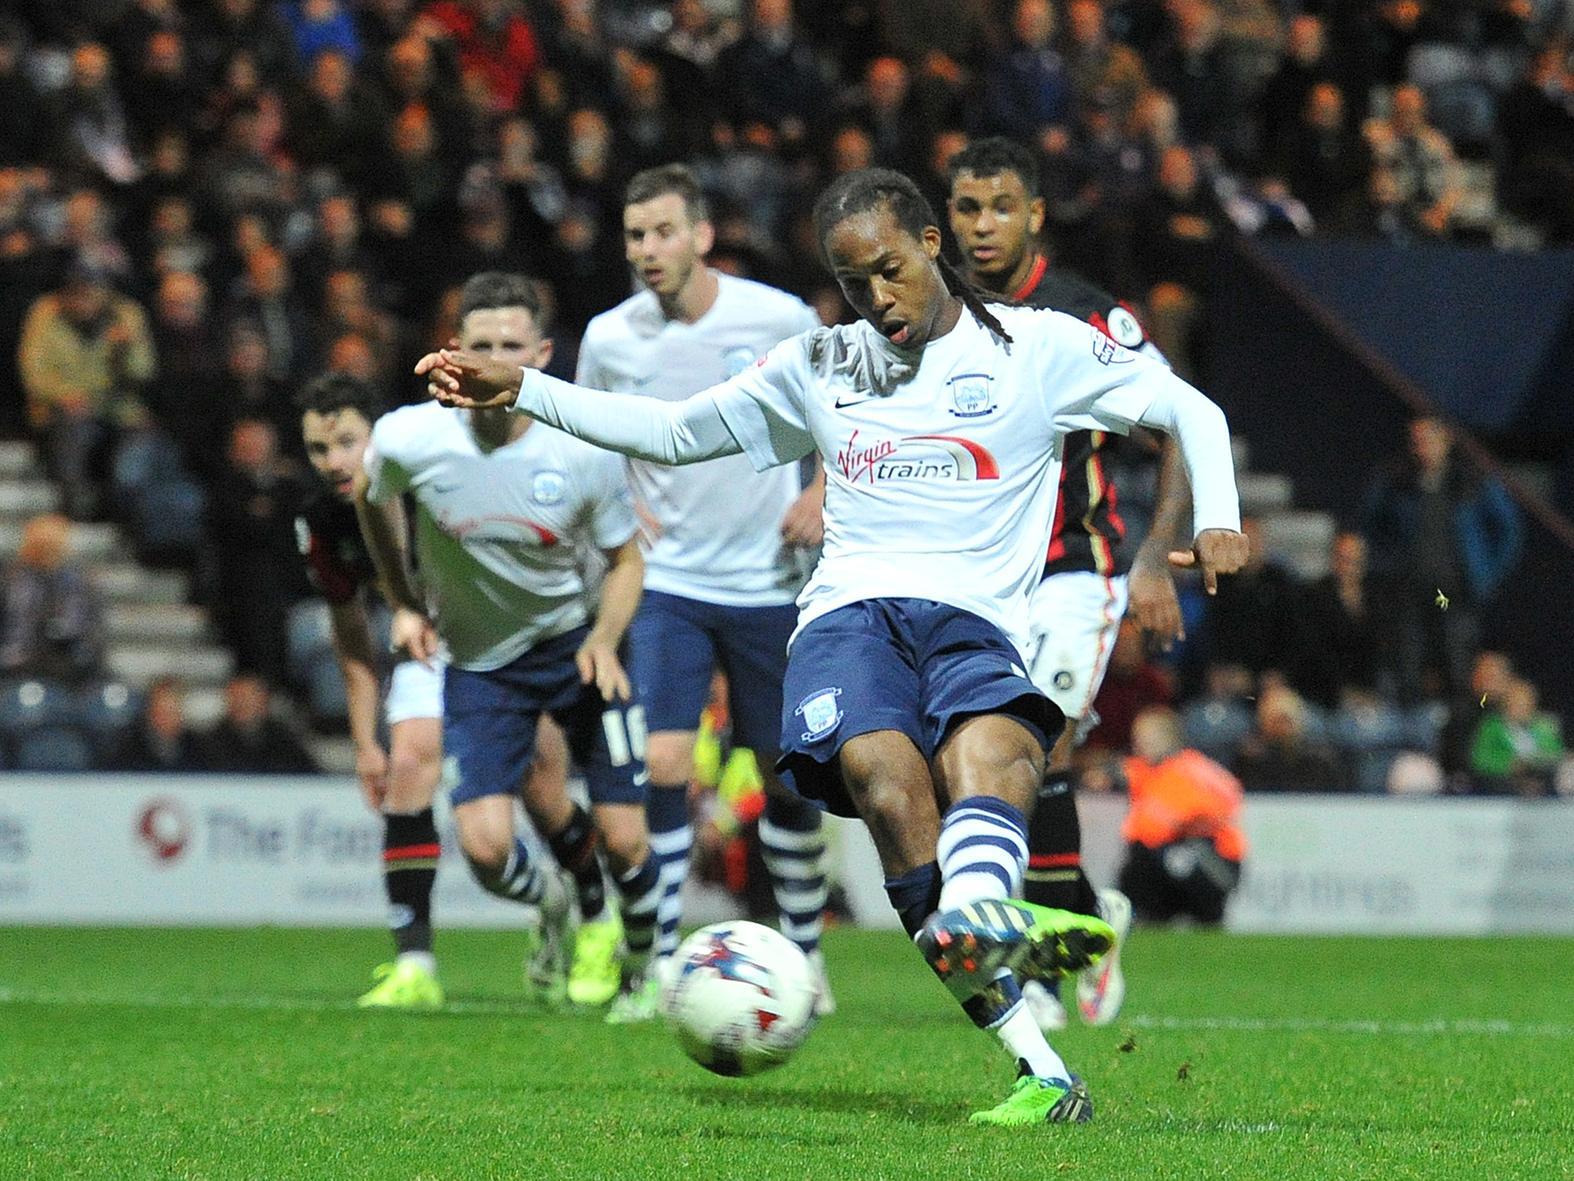 Daniel Johnson scores his first penalty for Preston in a League Cup clash against Bournemouth at Deepdale in September 2015